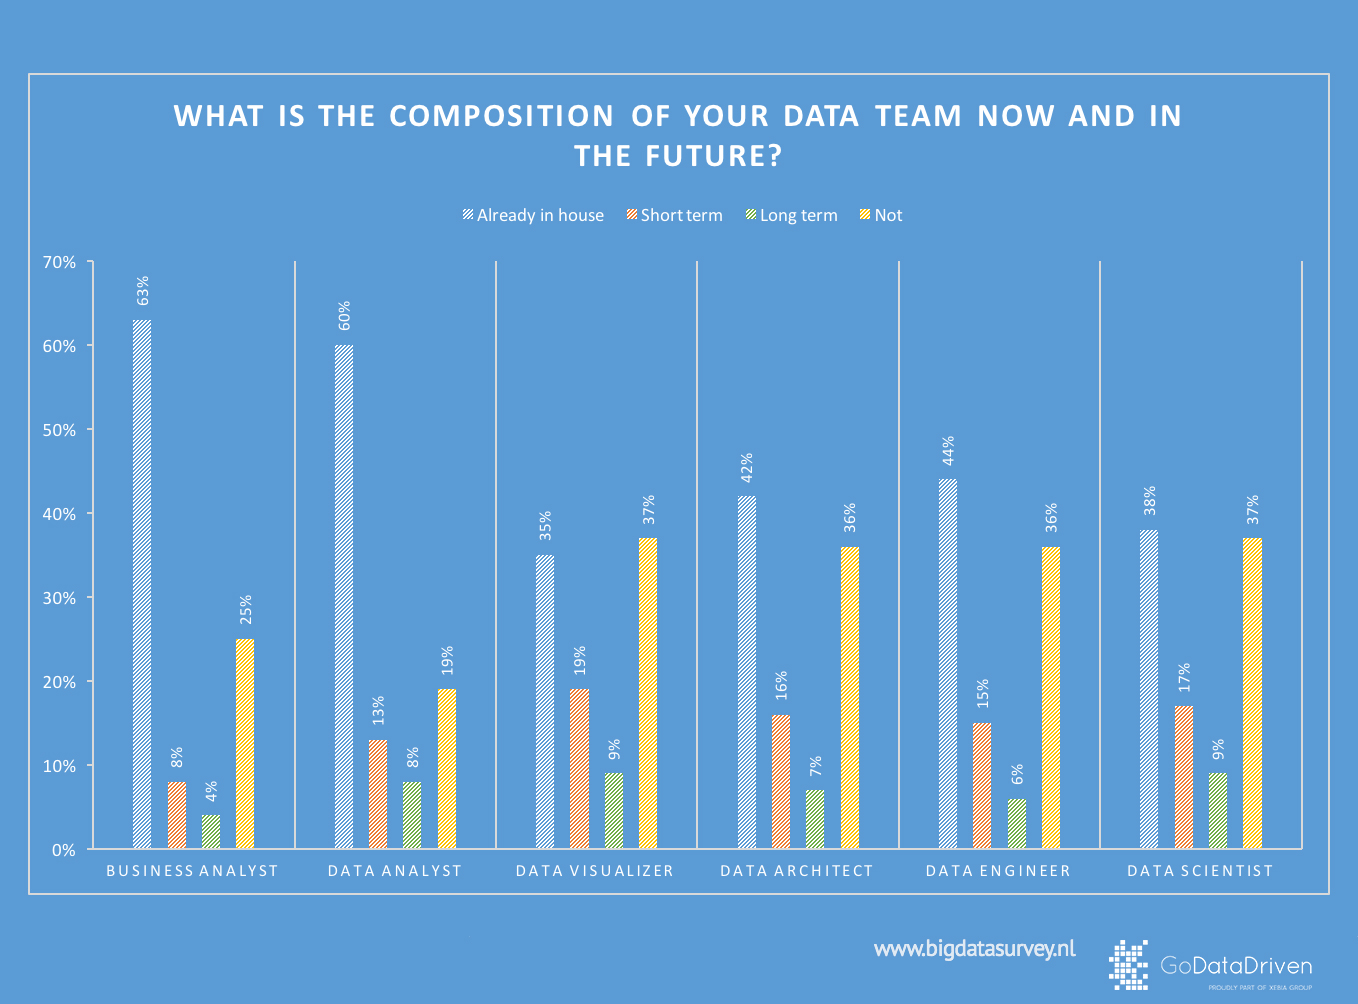 What is the composition of your data team?